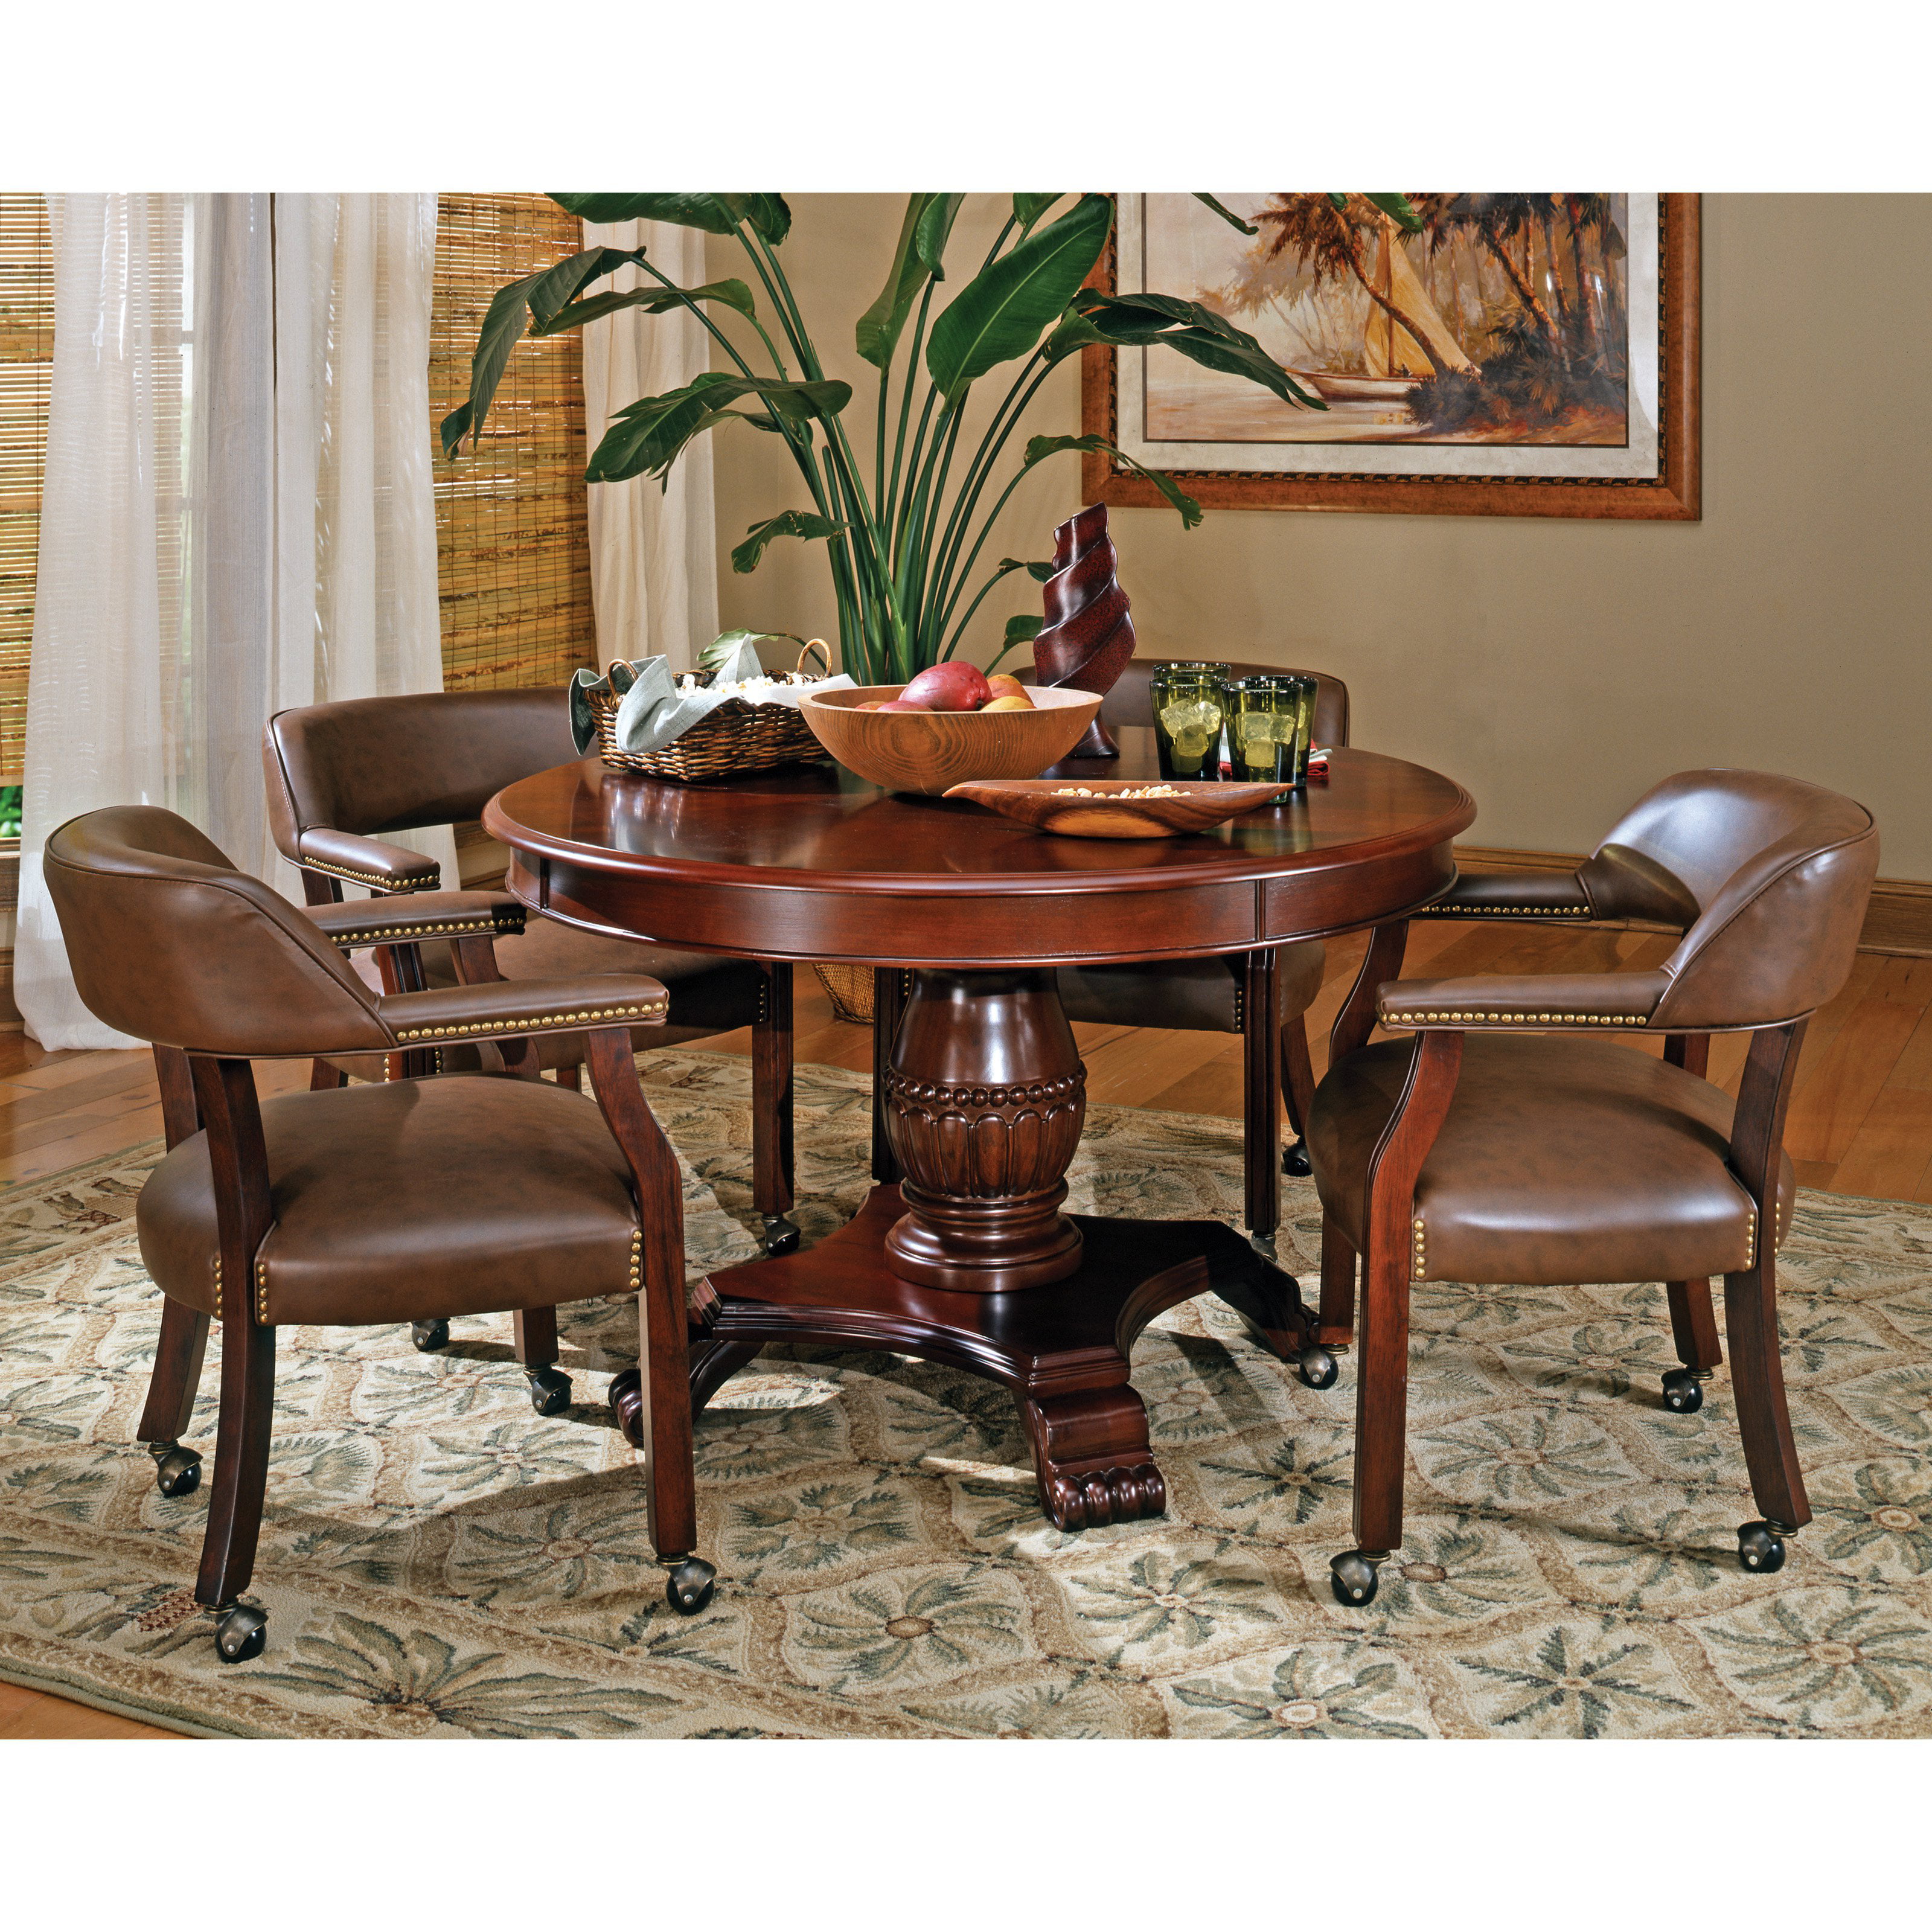 Steve Silver Tournament Arm Chairs With, Leather Kitchen Chairs With Casters